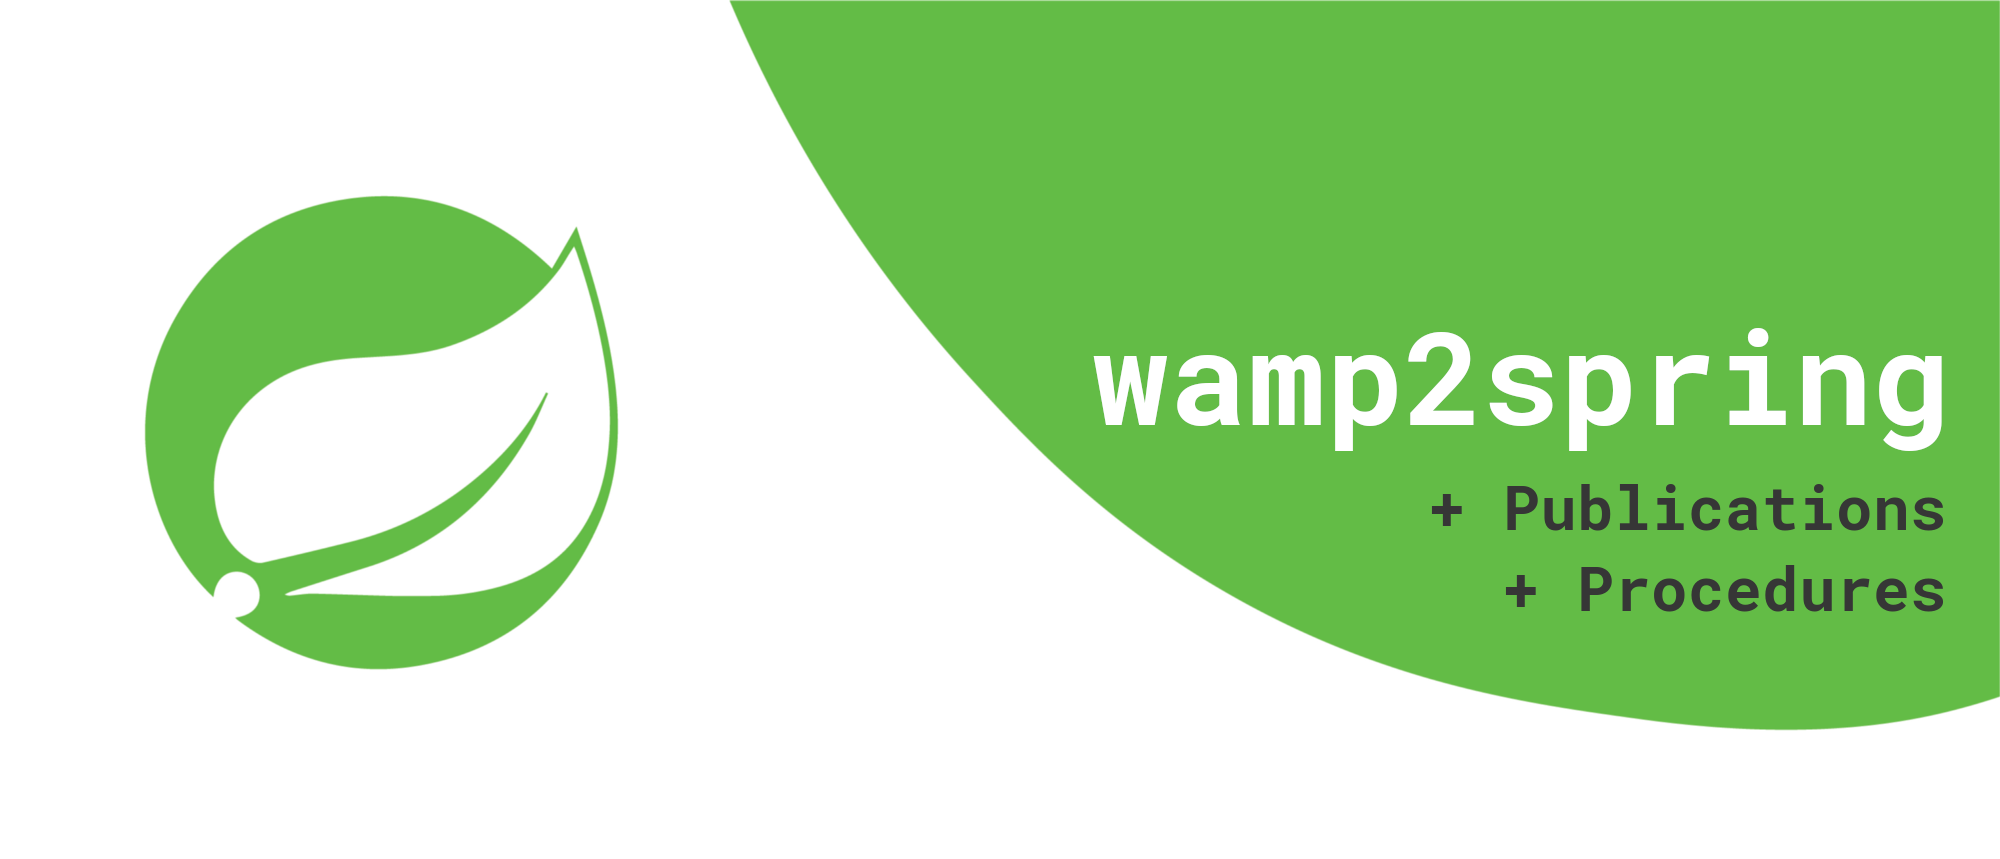 wamp2spring serves as a WAMP router and could register remote procedures and publish on topics.